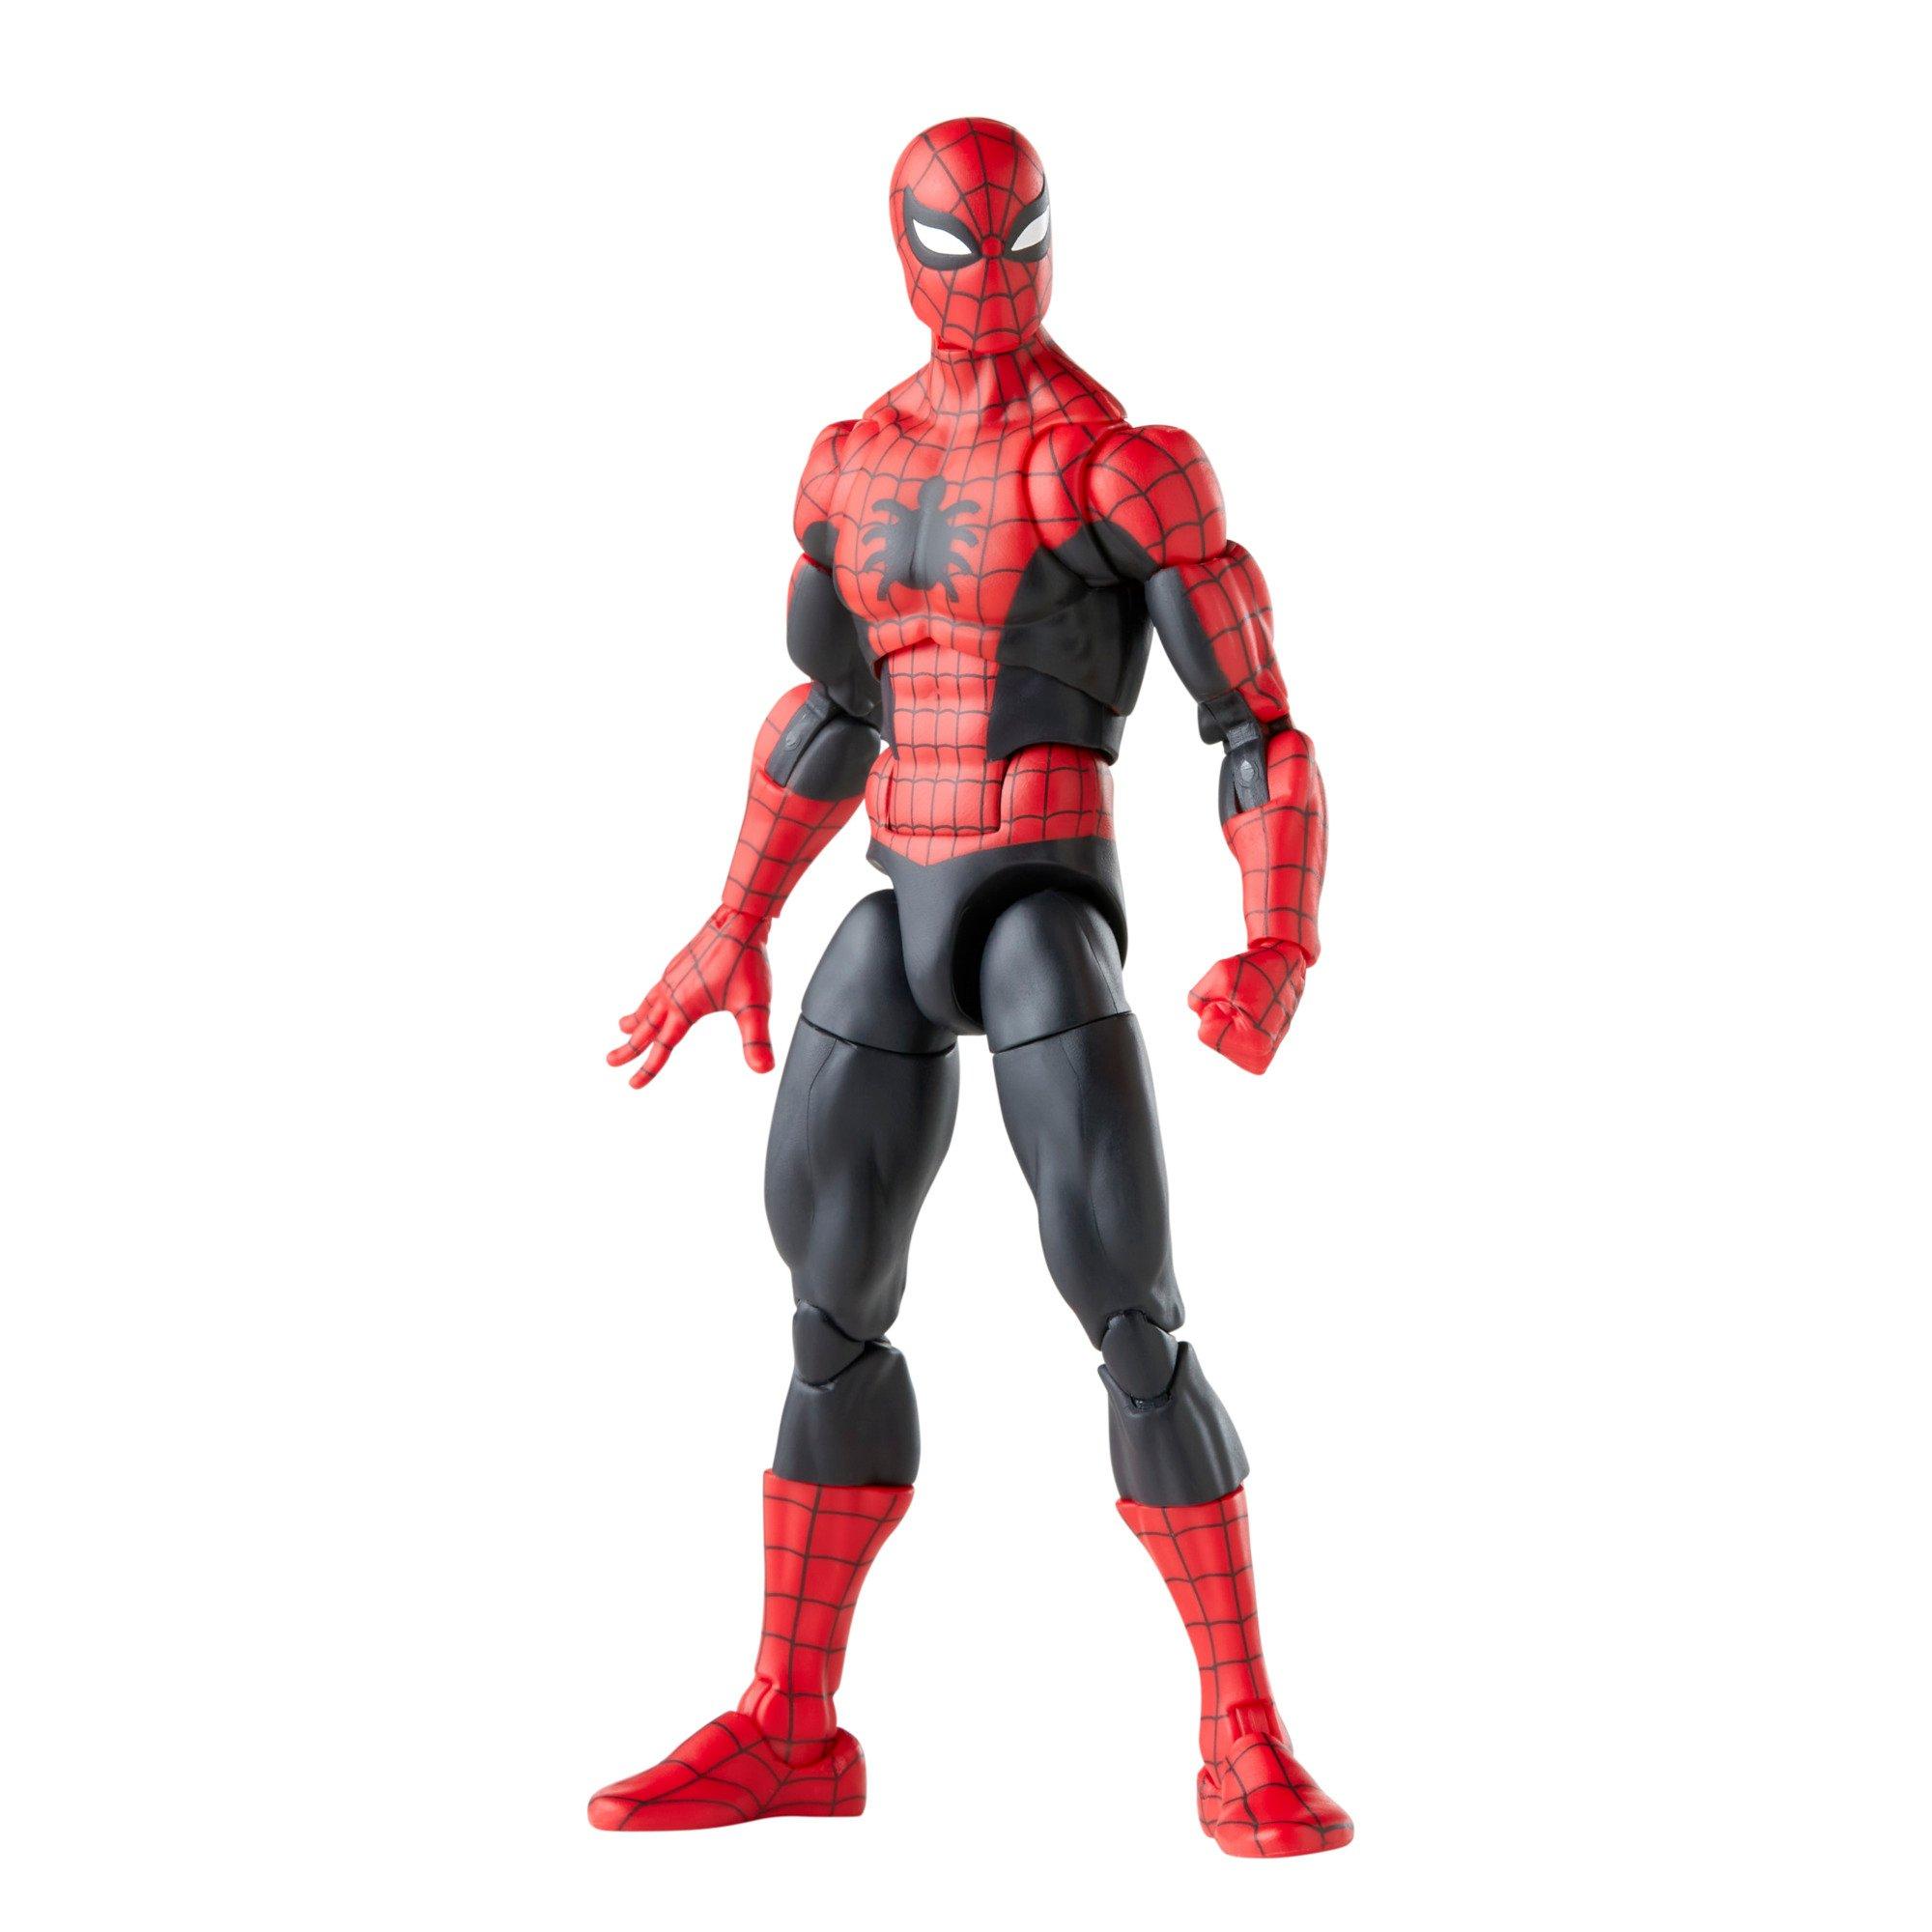 Hasbro Marvel Spider-Man Homecoming Legends Series 6-inch Action Figure for sale online 